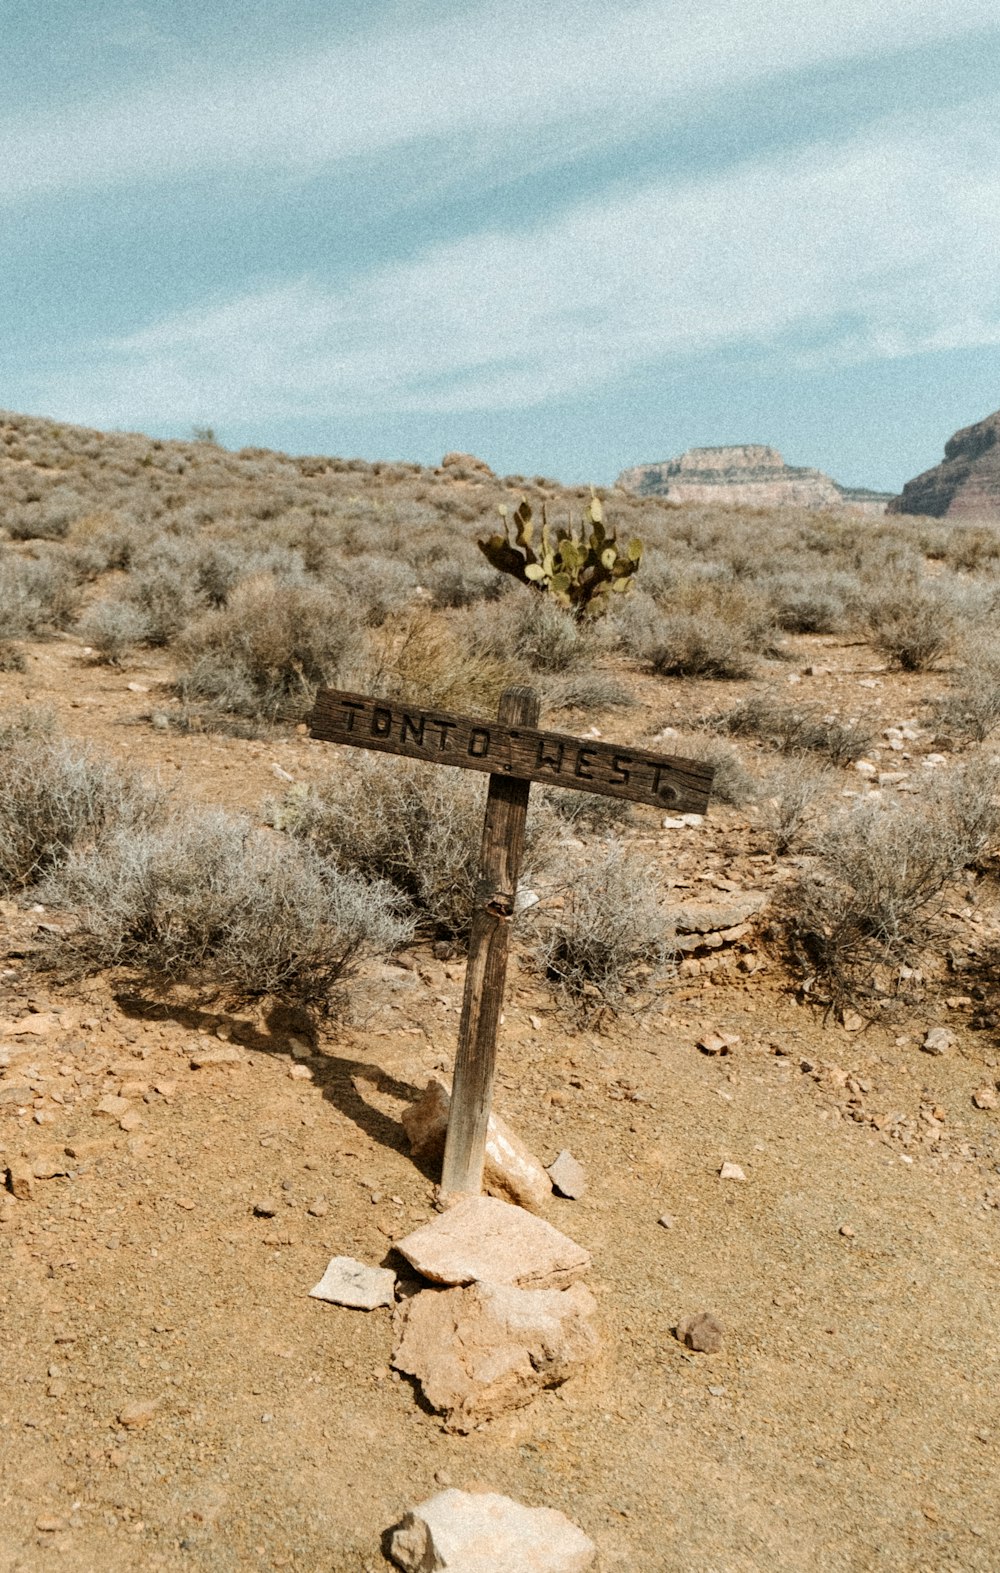 a sign in the desert